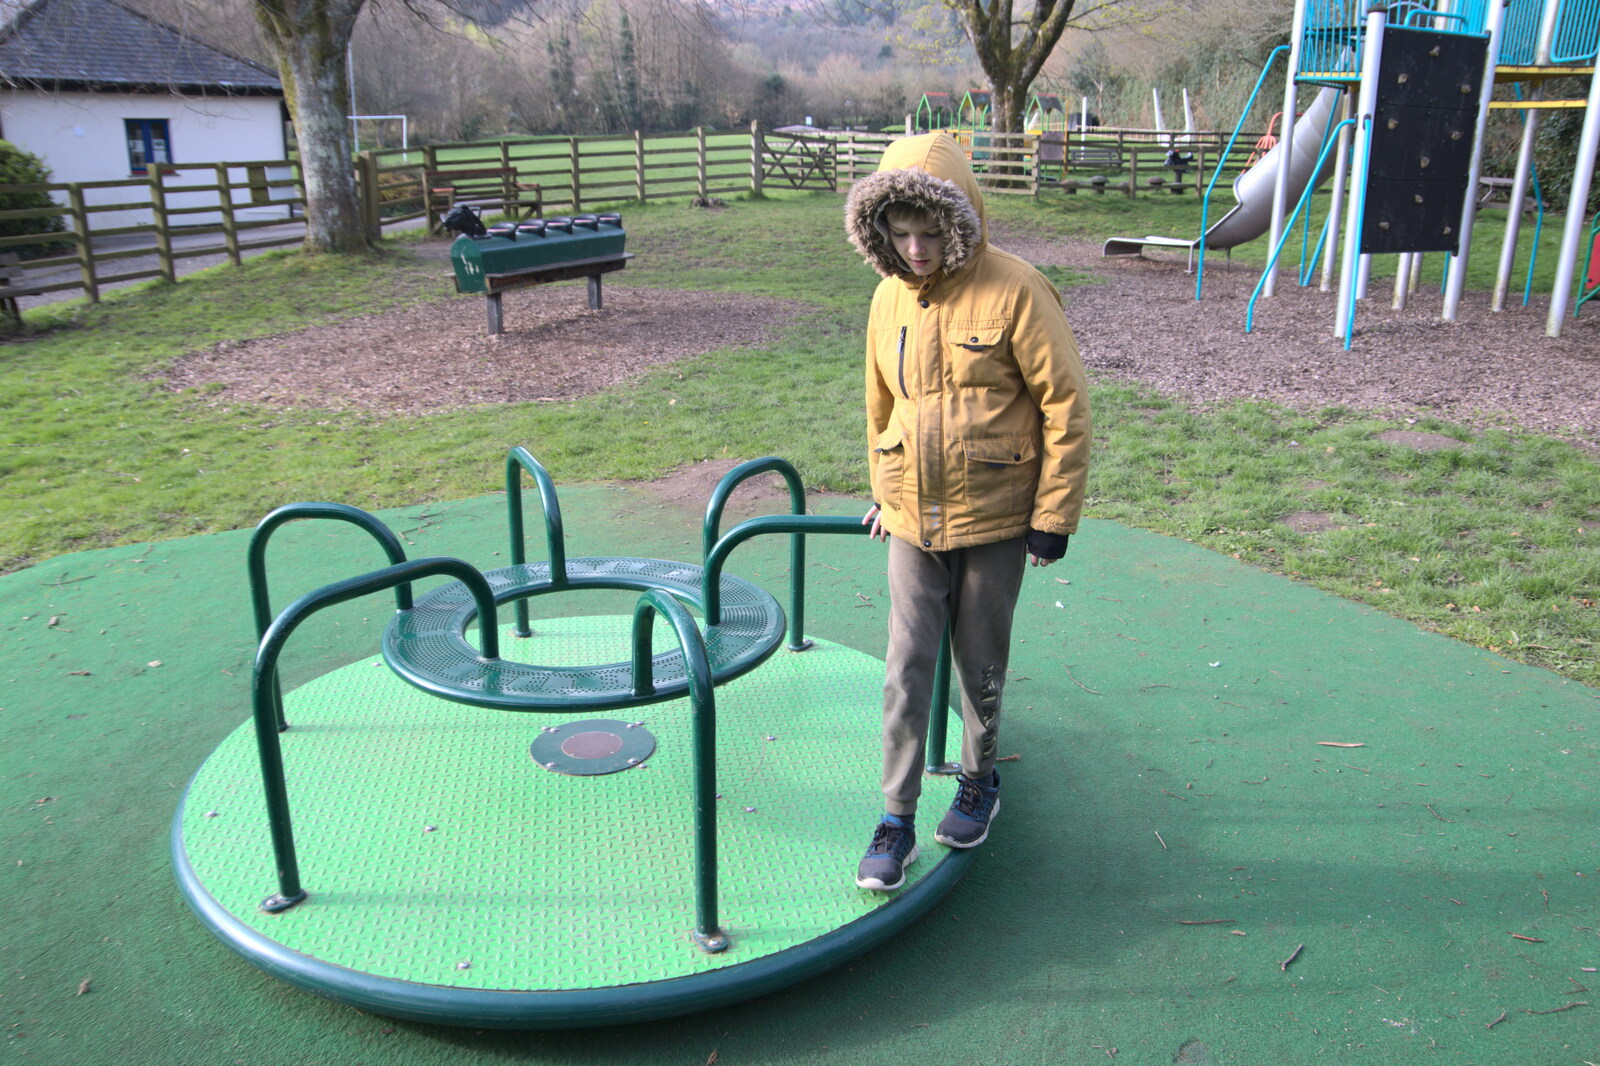 Harry spins around in the playground from Easter in South Zeal and Moretonhampstead, Devon - 9th April